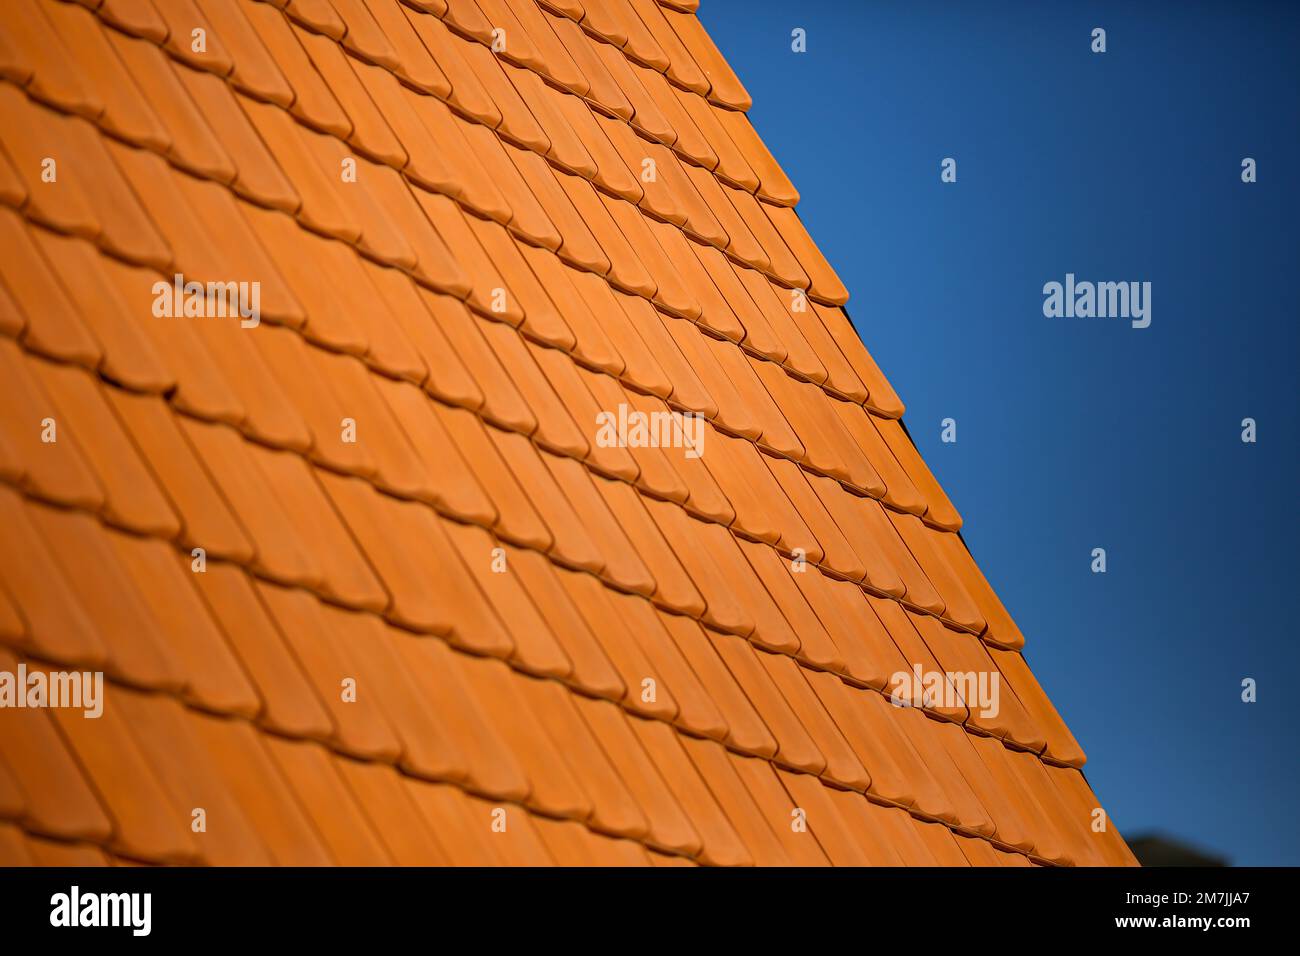 Details of orange brick tile roof patterns with clear bright blue sky in the background. Close-up of House Architecture patterns. Stock Photo